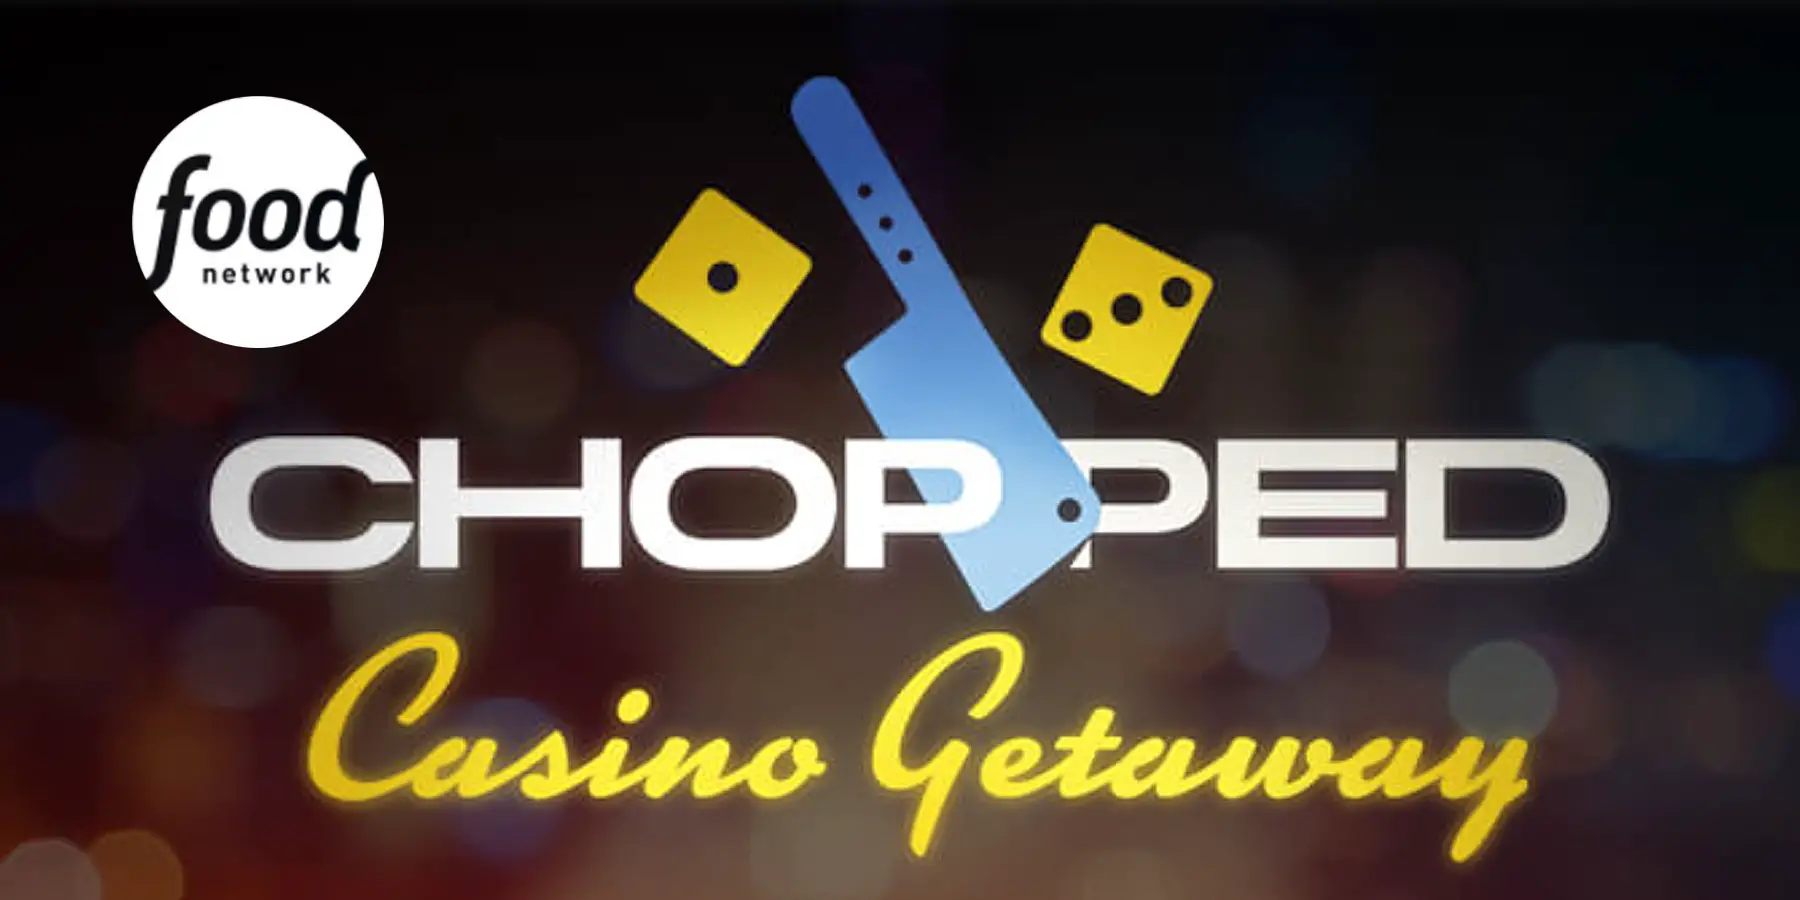 Win the Chopped Vegas jackpot! Enter the Chopped Casino Getaway sweepstakes for your chance to win a Vegas weekend for two including an exclusive VIP dining experience and $5k spending money.